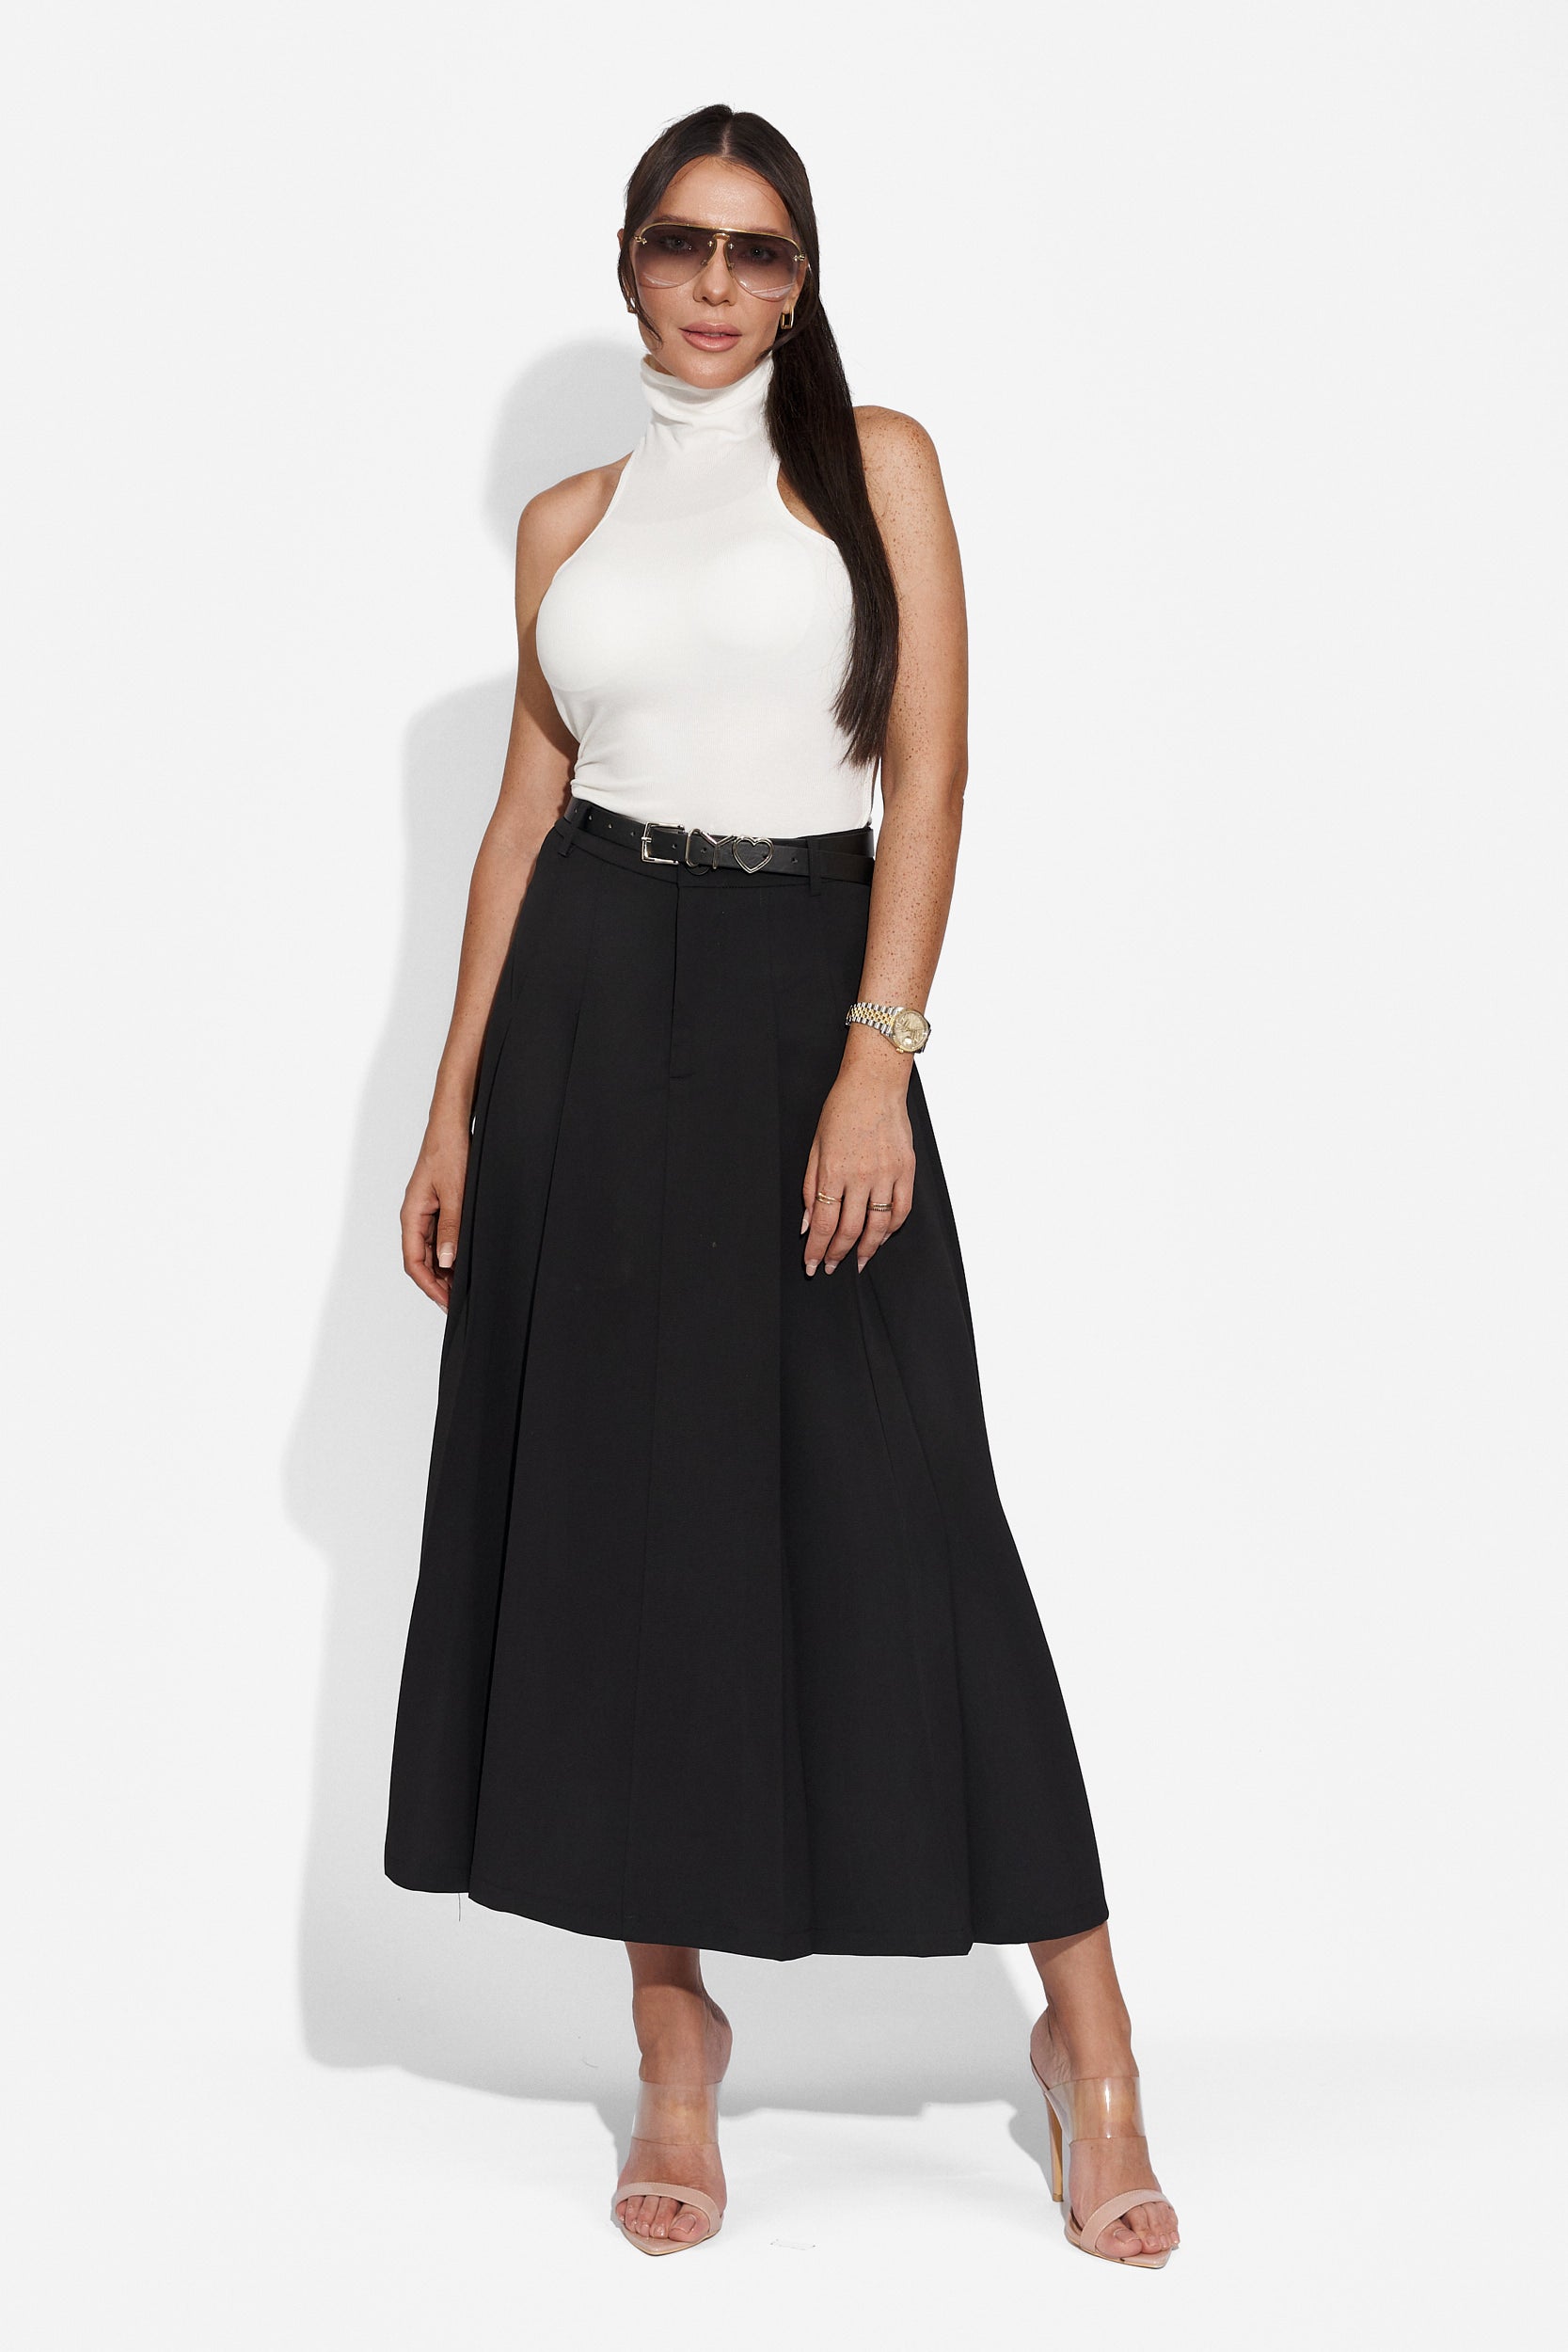 Geamina Bogas black casual lady skirt